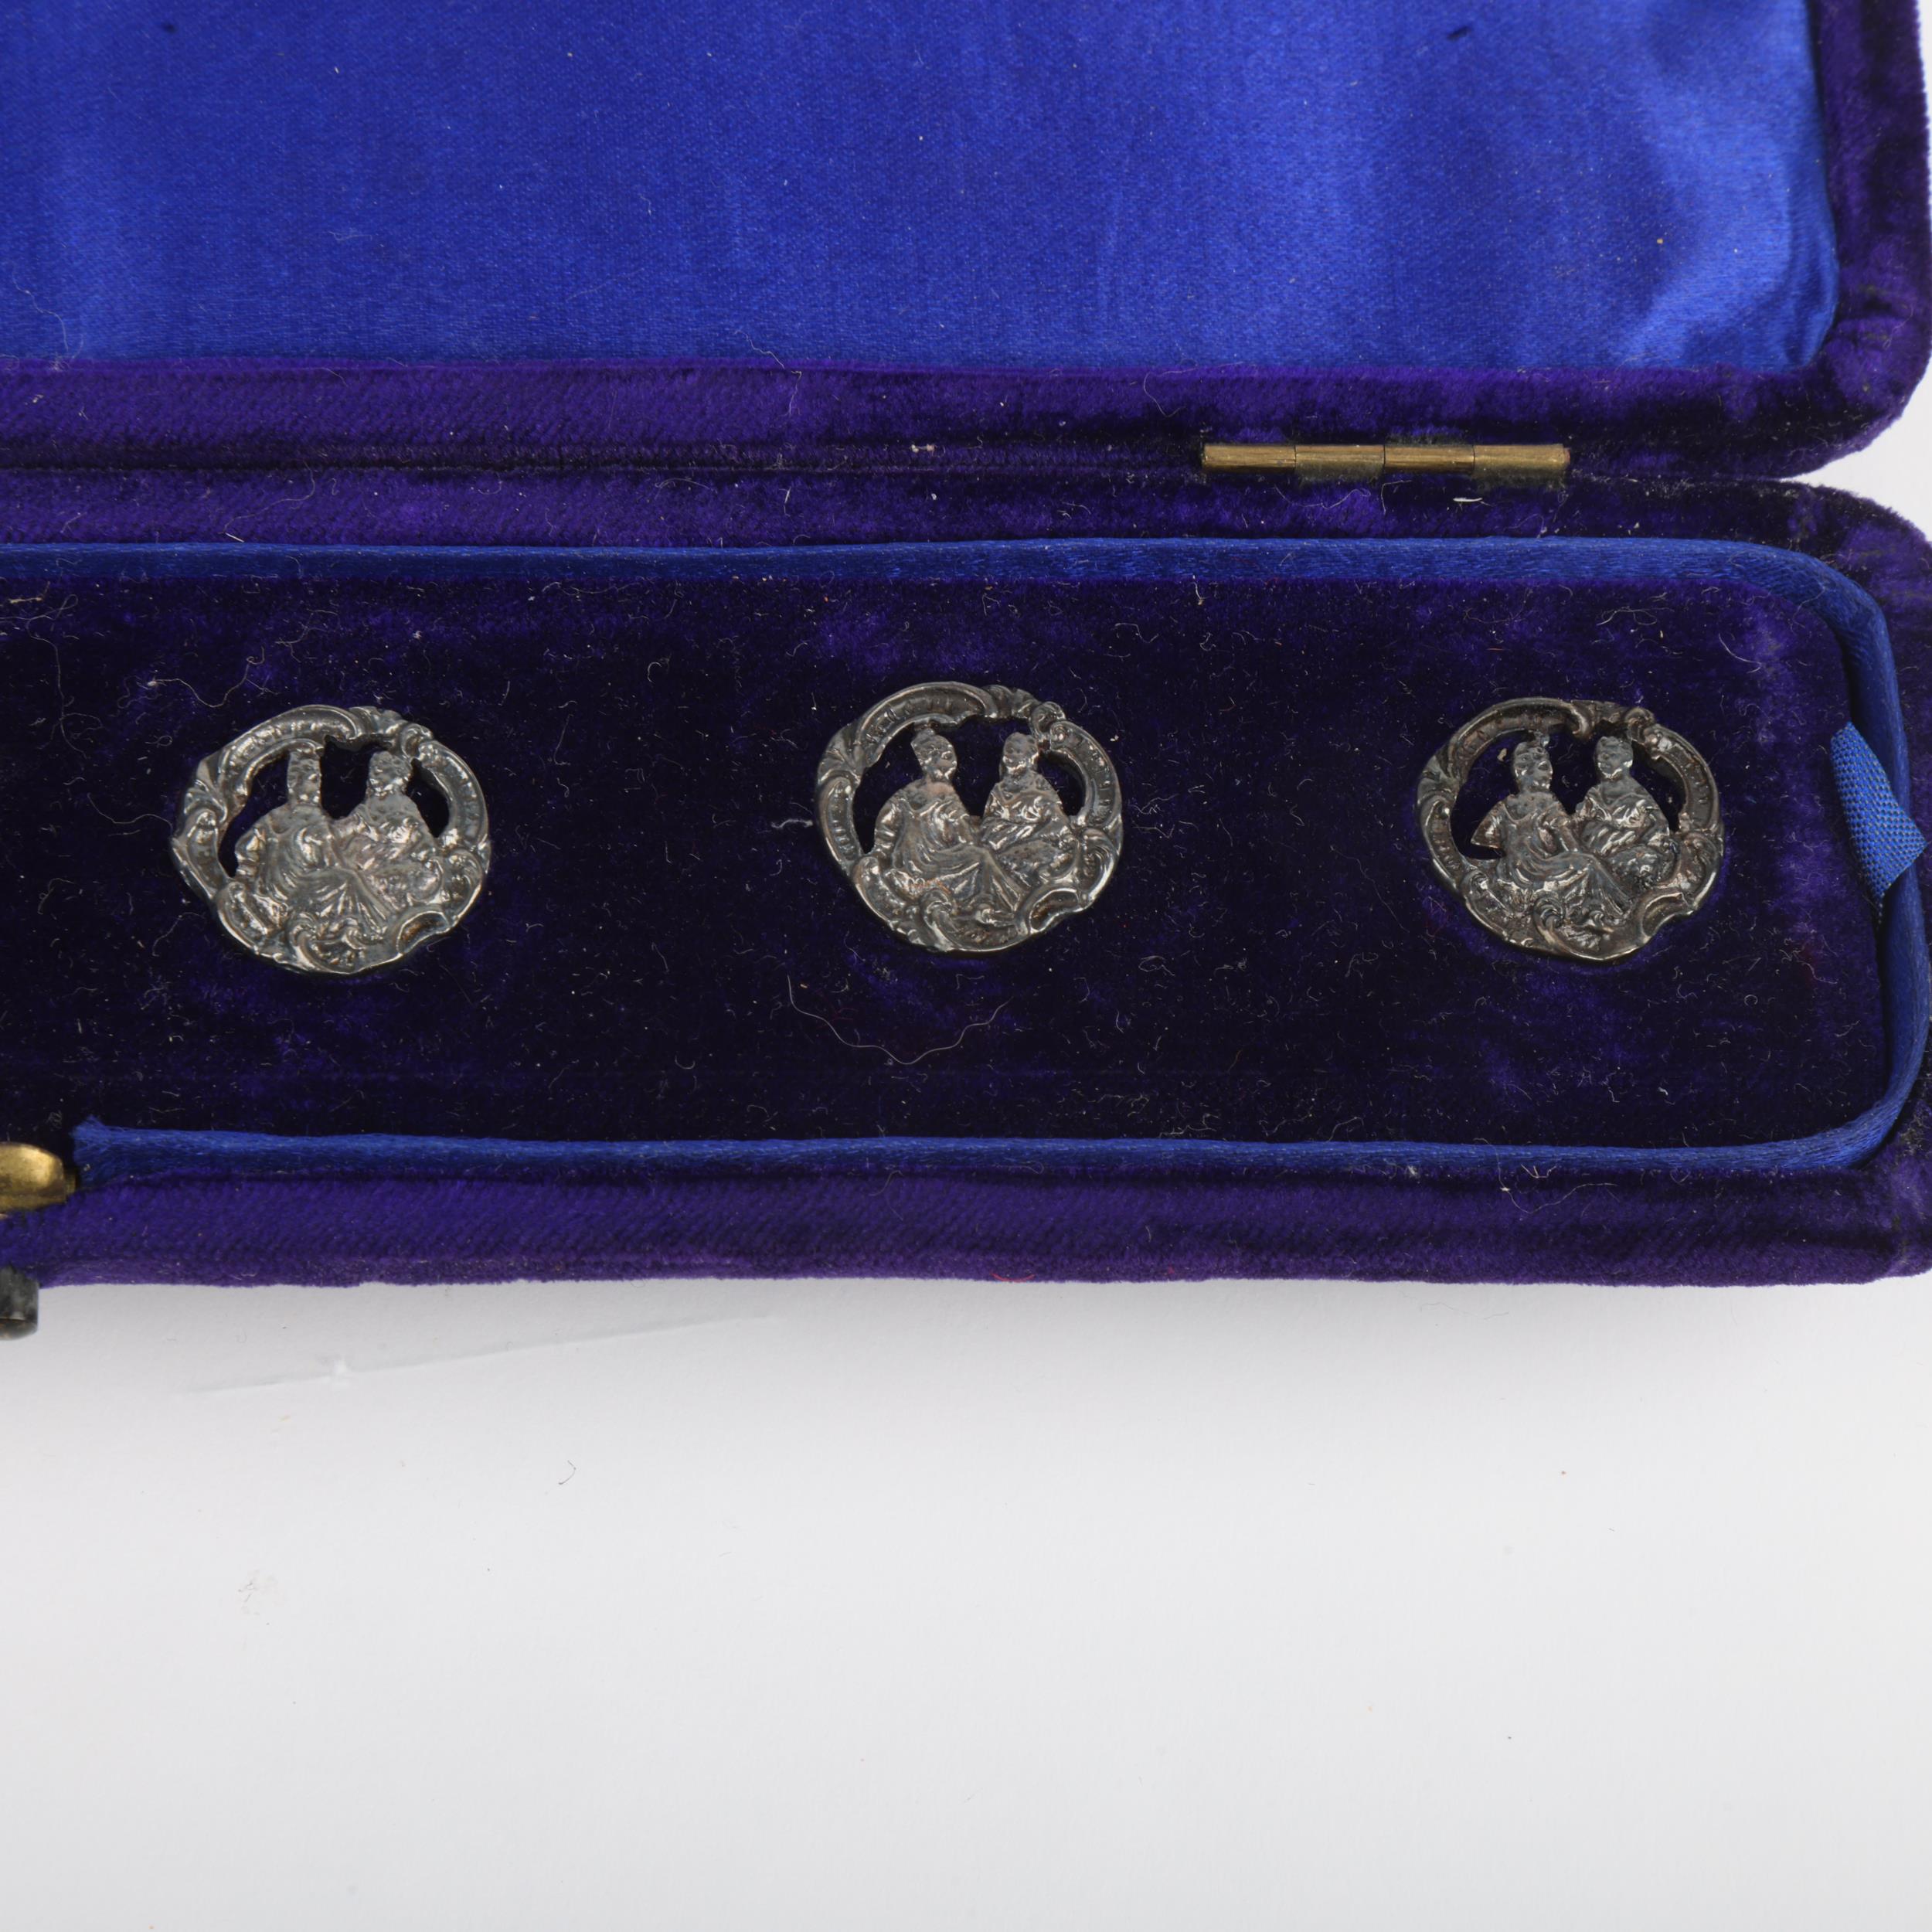 A cased set of 6 Art Nouveau buttons, registration no. 352928, apparently unmarked, 2cm No damage or - Image 2 of 3